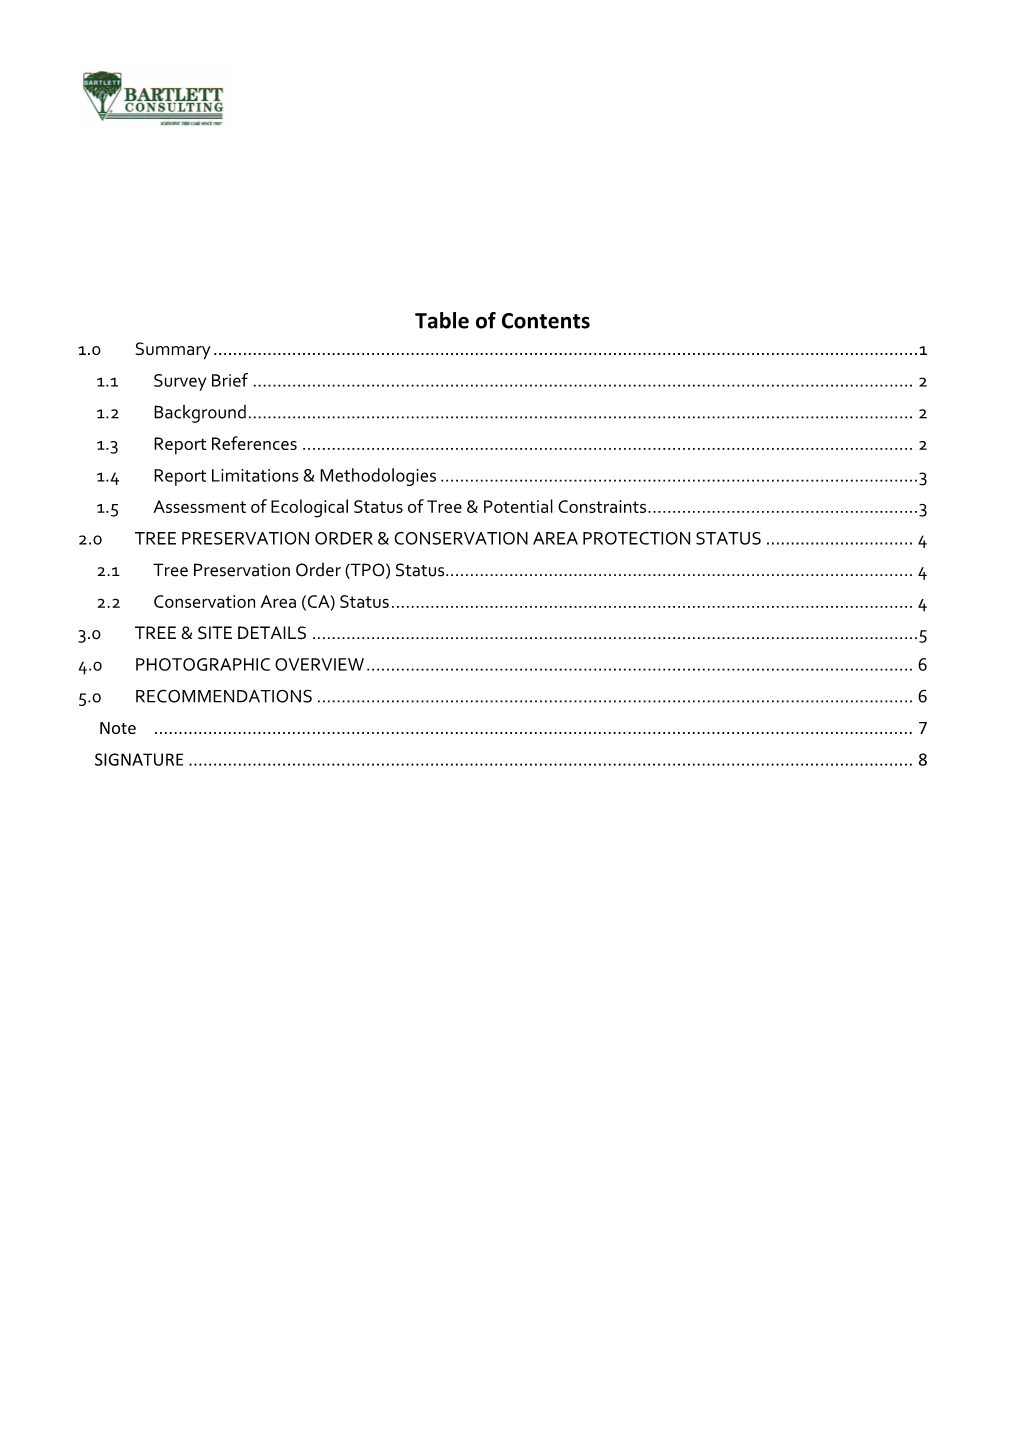 Table of Contents 1.0 Summary